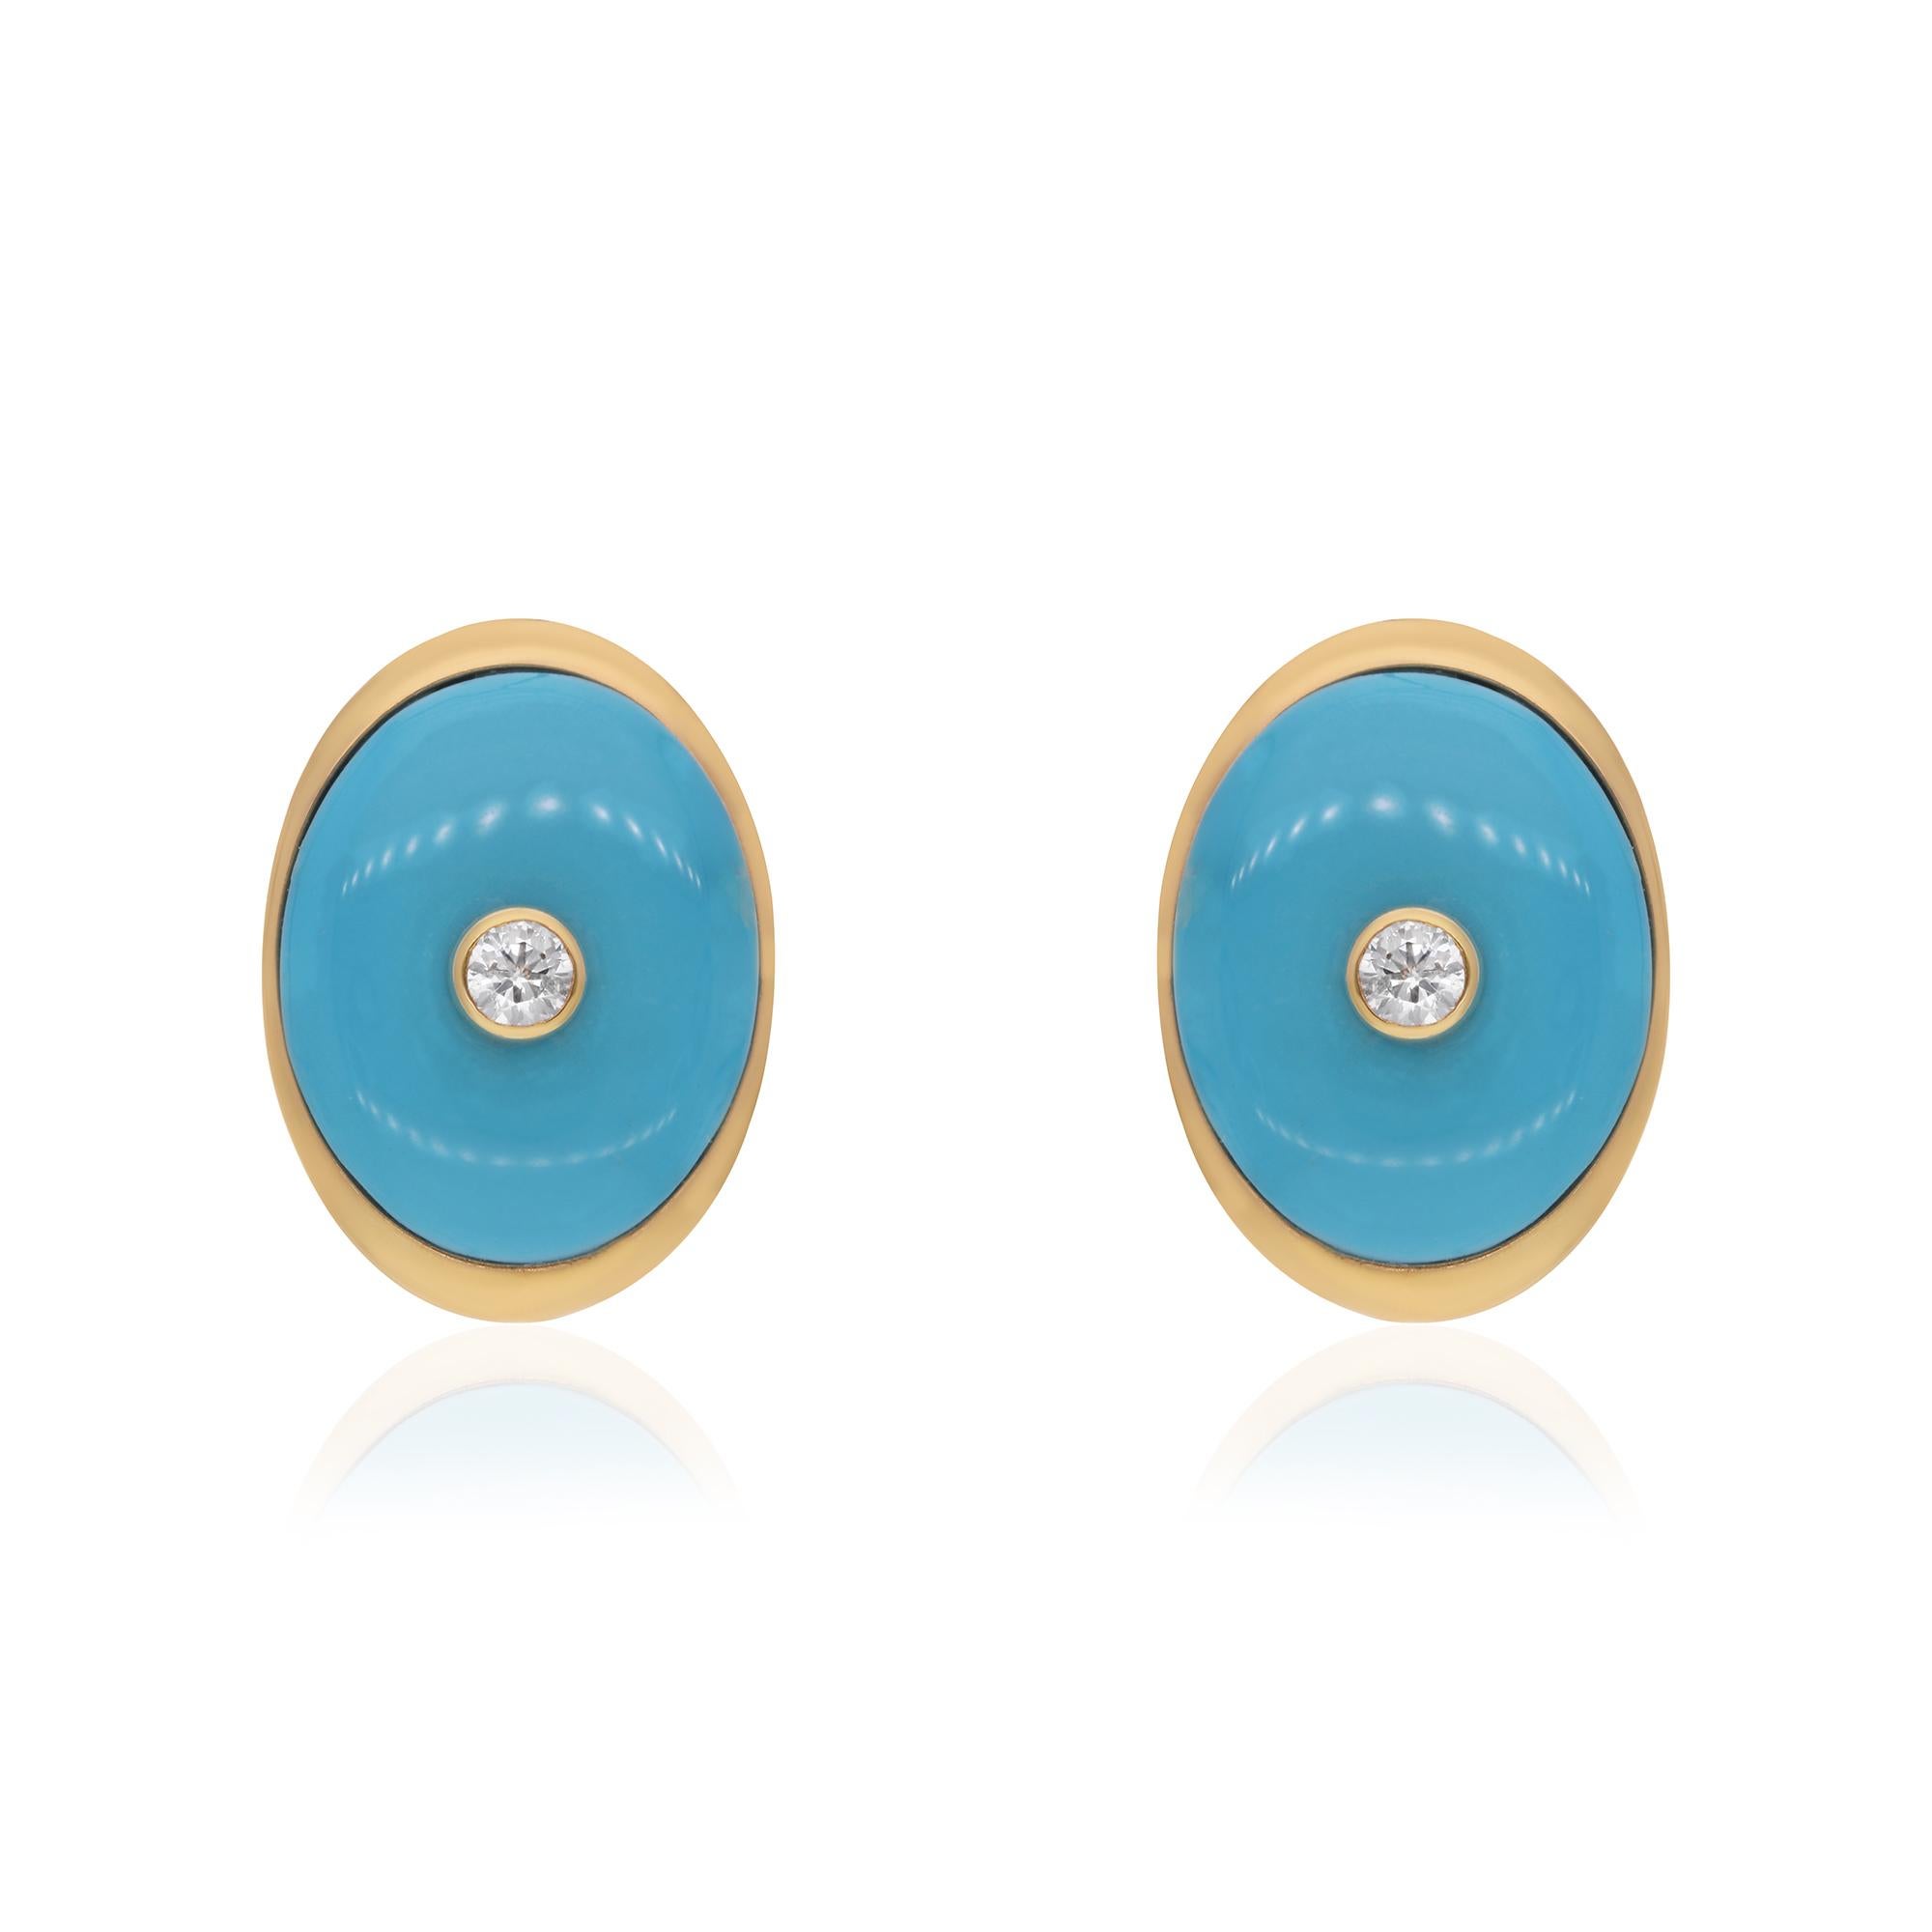 At the center of each earring gleams a captivating oval turquoise gemstone, renowned for its vibrant blue-green hue and unique veining. Sourced from the finest sources, these turquoise stones add a pop of color and personality to the earrings,